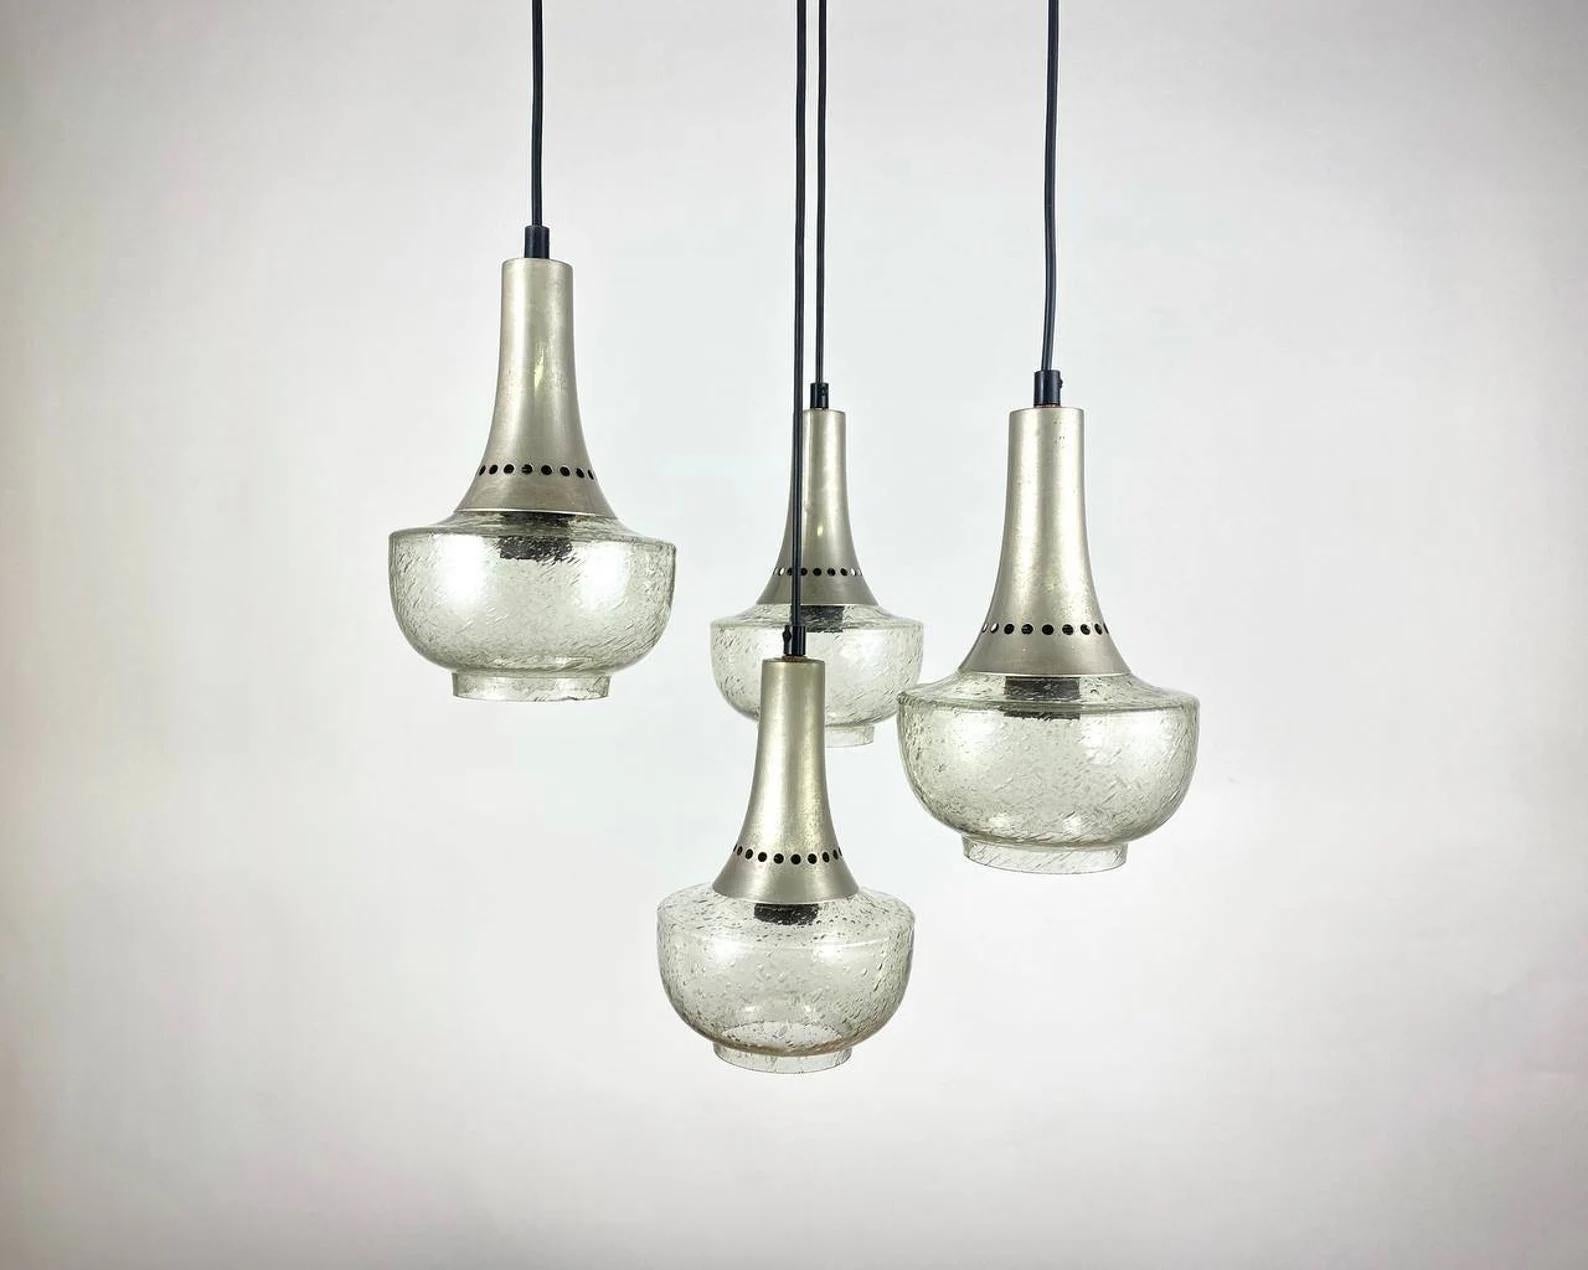 Vintage cascade chandelier/ 4-light pendant lamp in Mid-Century Modern style.

1970's Pendant Lighting with 4 glass shades mounted on a stainless steel structure.

Shades of glass will practically not prevent the passage of light. 

Tall